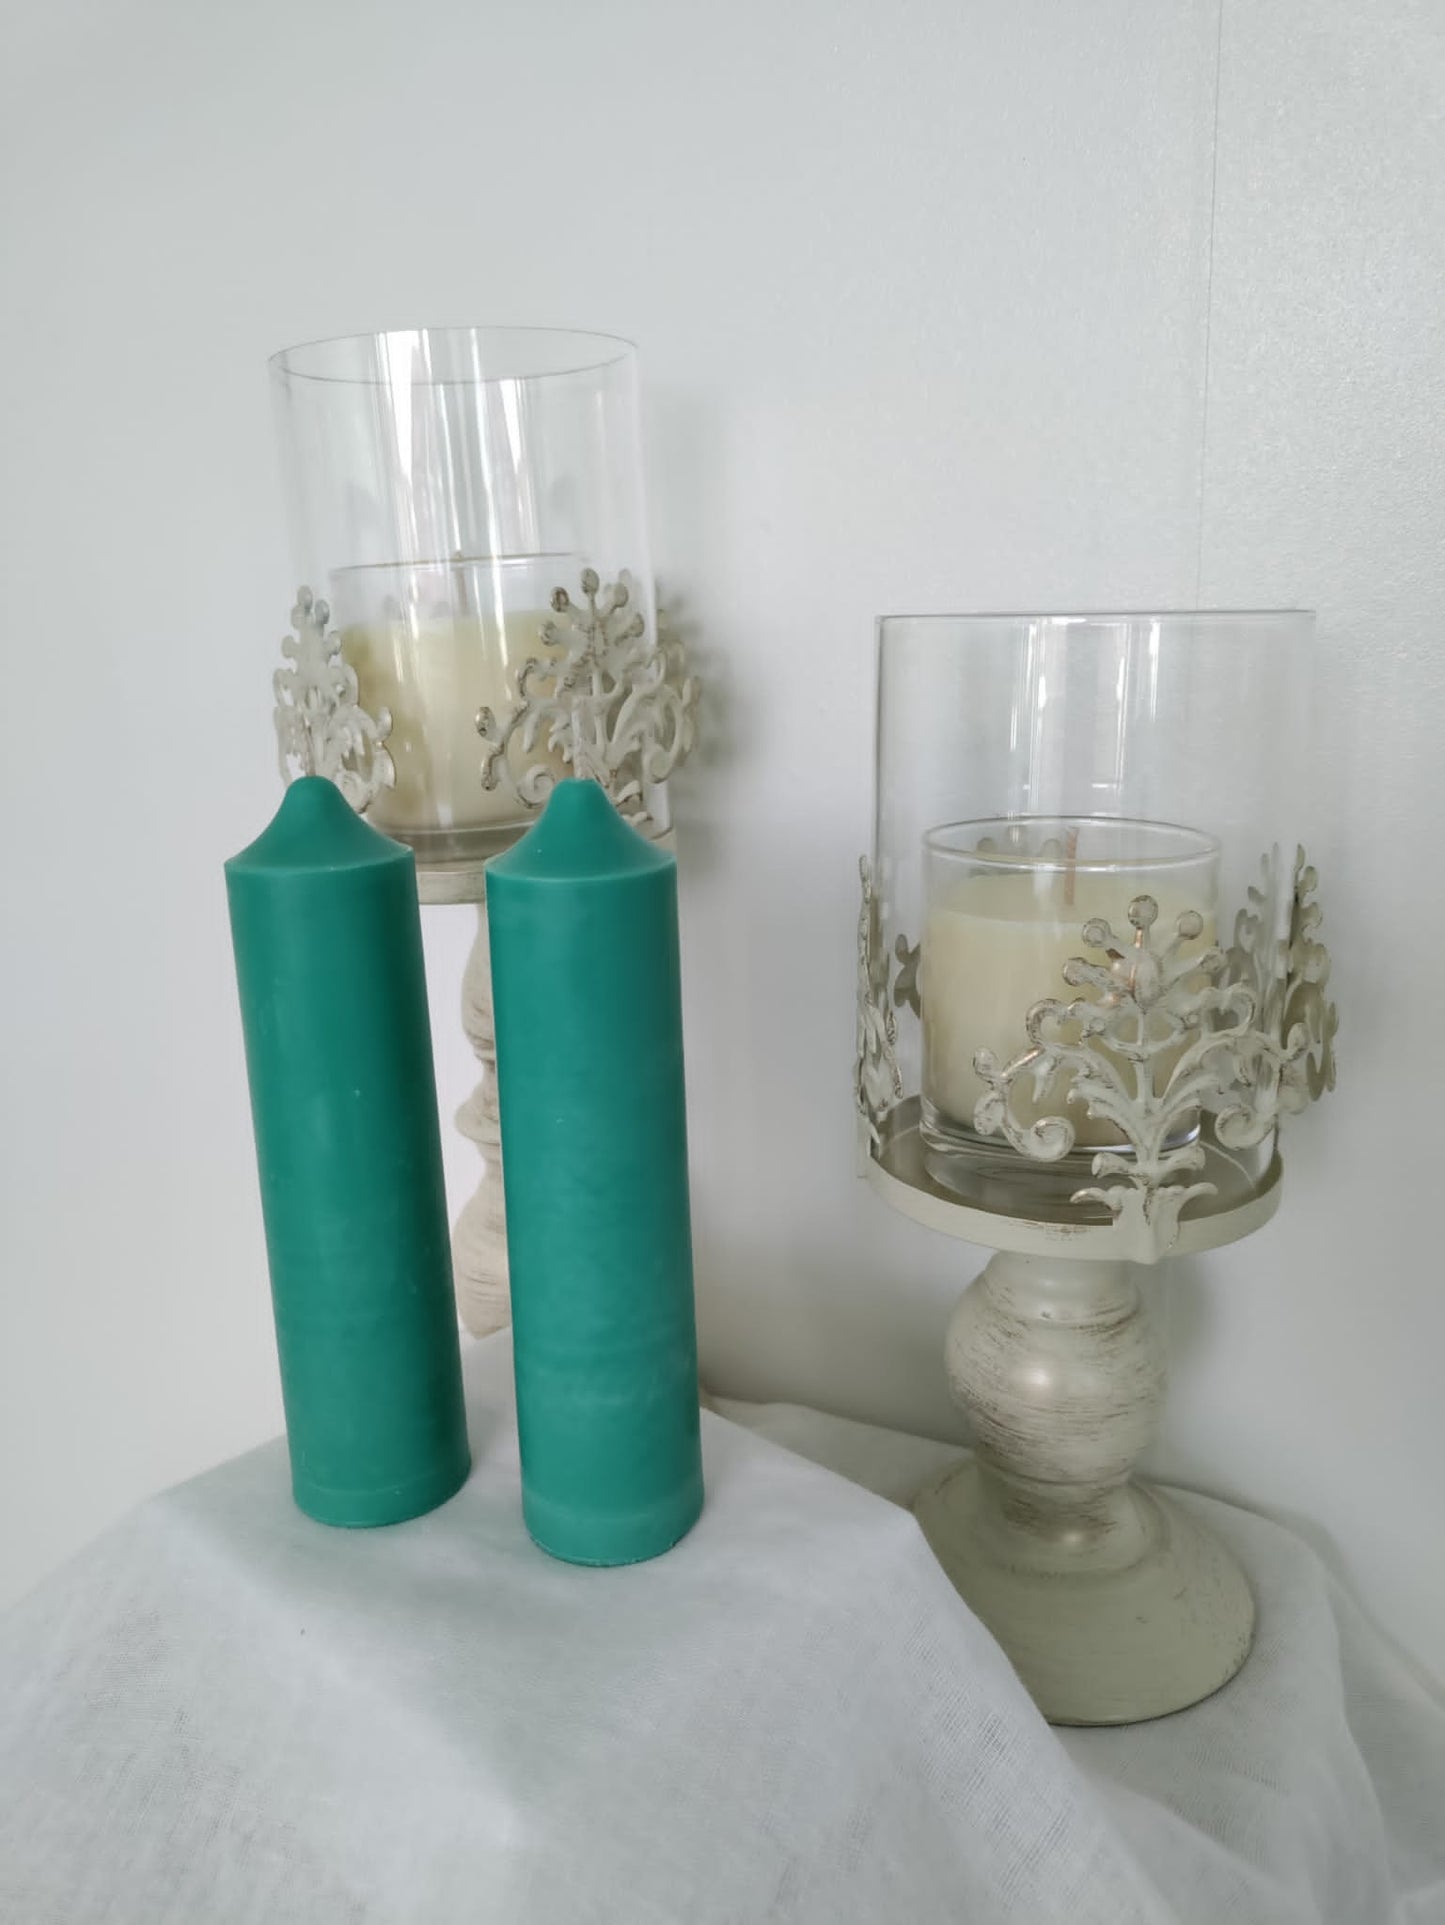 Teal Green Soy Wax Pillar Candles - Unscented, Set of 2 (Various Sizes)